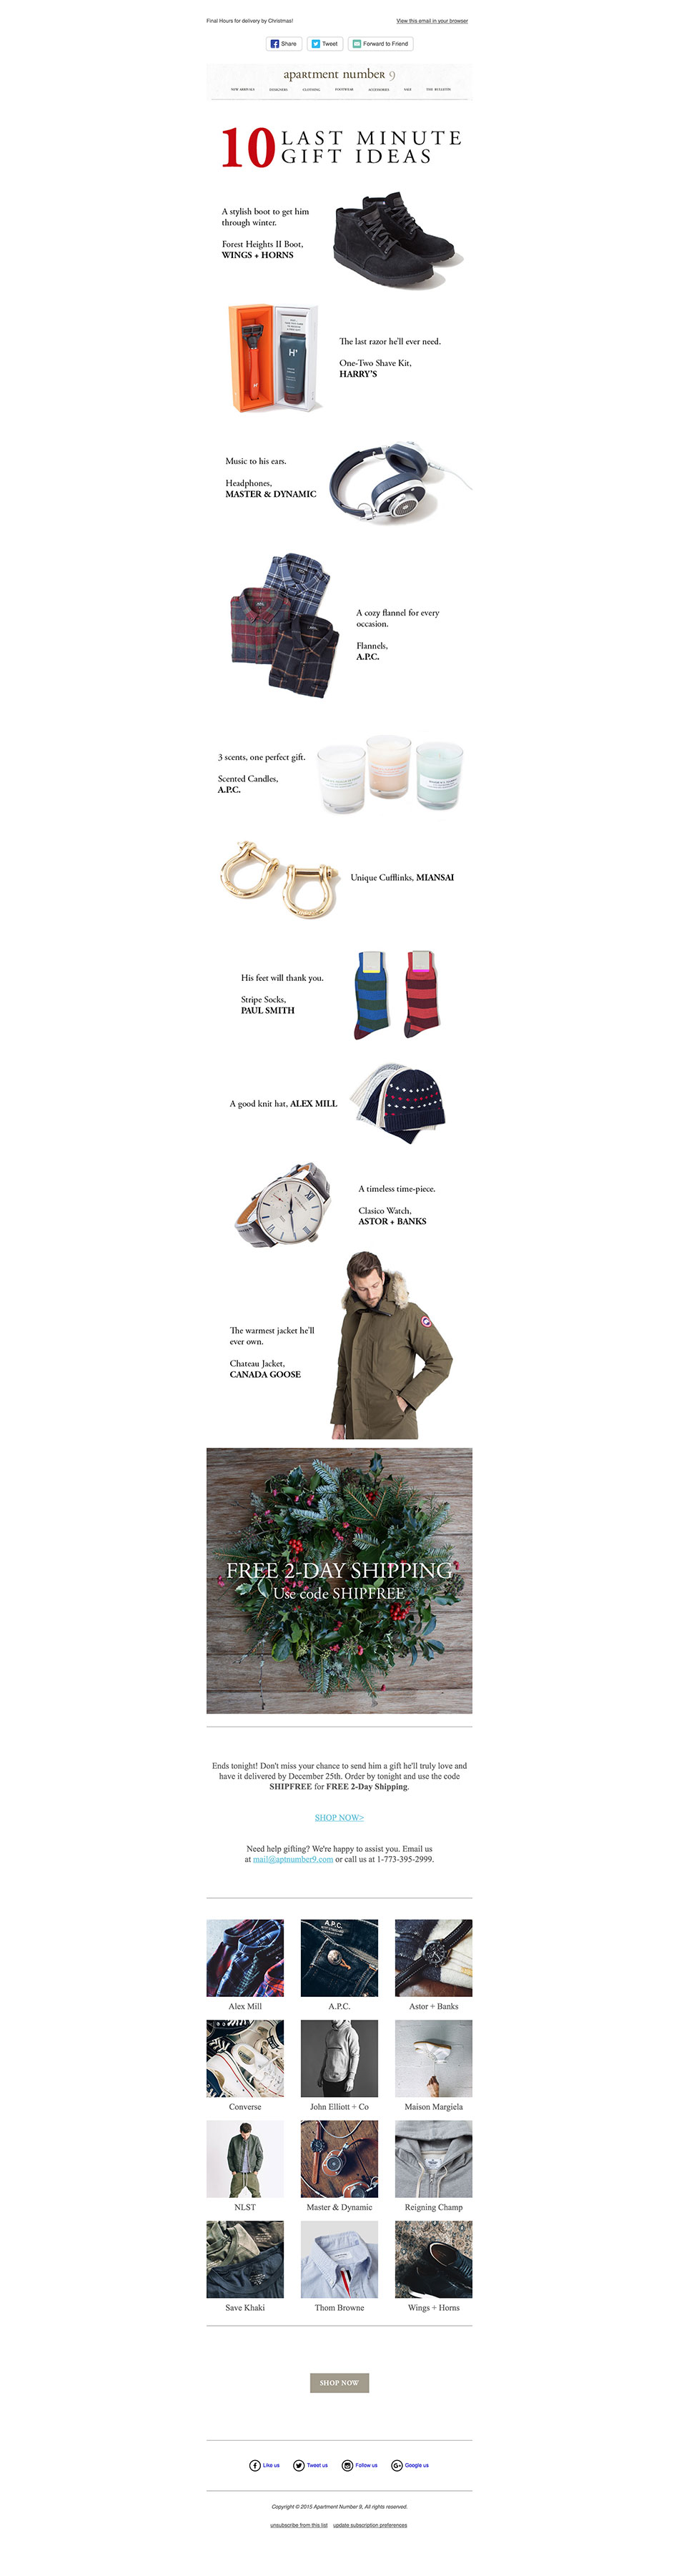 Holiday-Gift-Guide-2015-Email